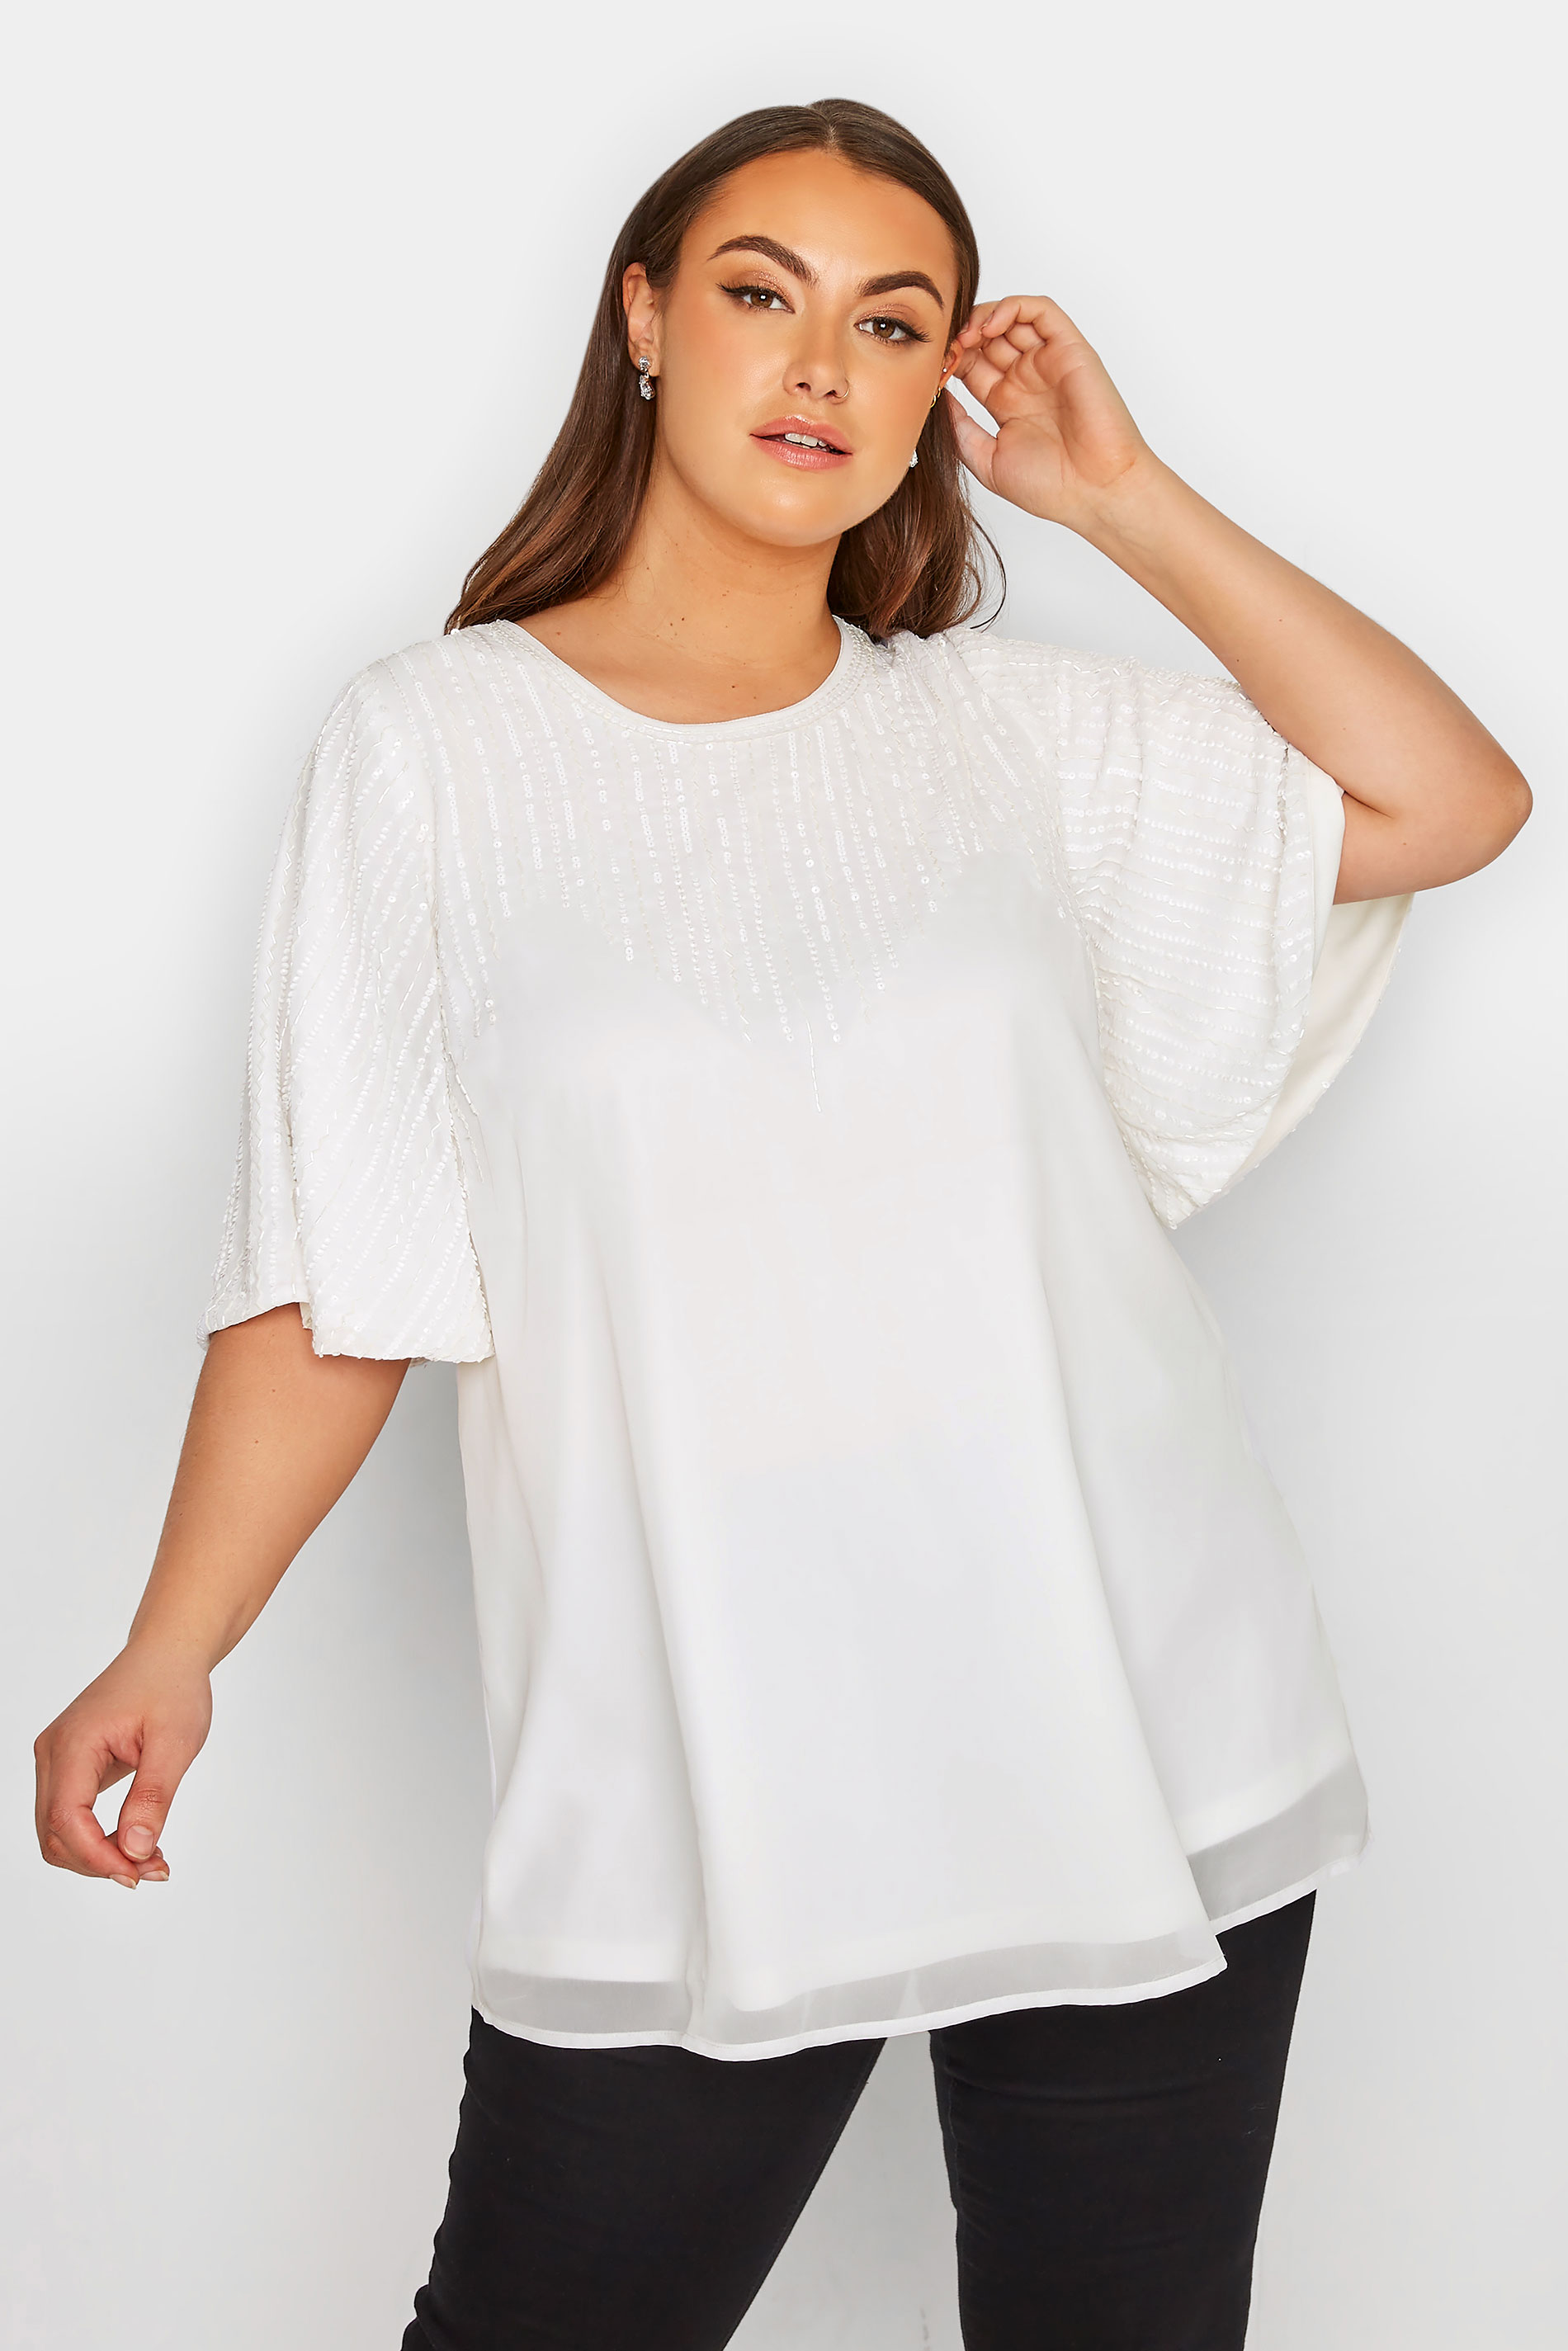 LUXE Curve White Sequin Embellished Sweetheart Top_A.jpg